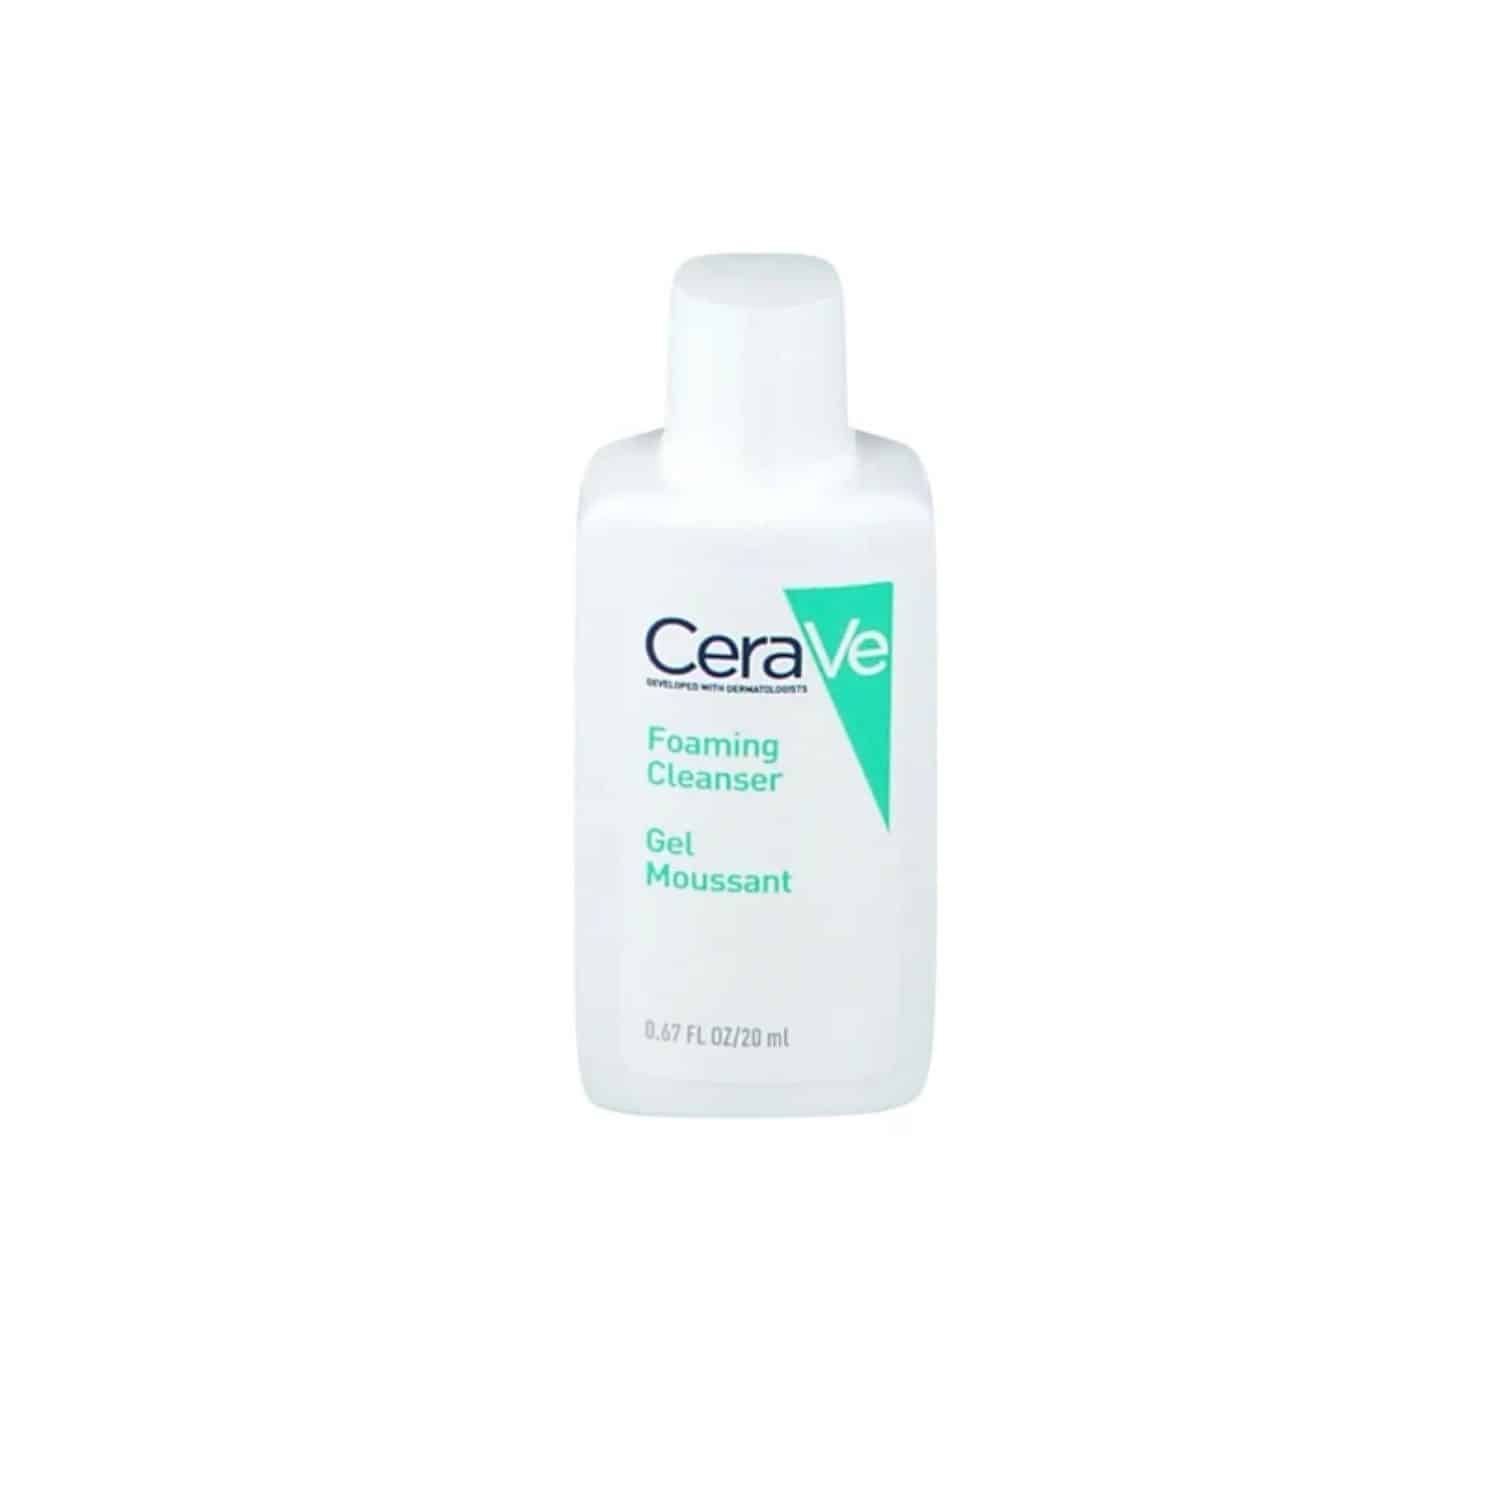 CeraVe Foaming Cleanser Travel Size 20ml SHOPEE MALL